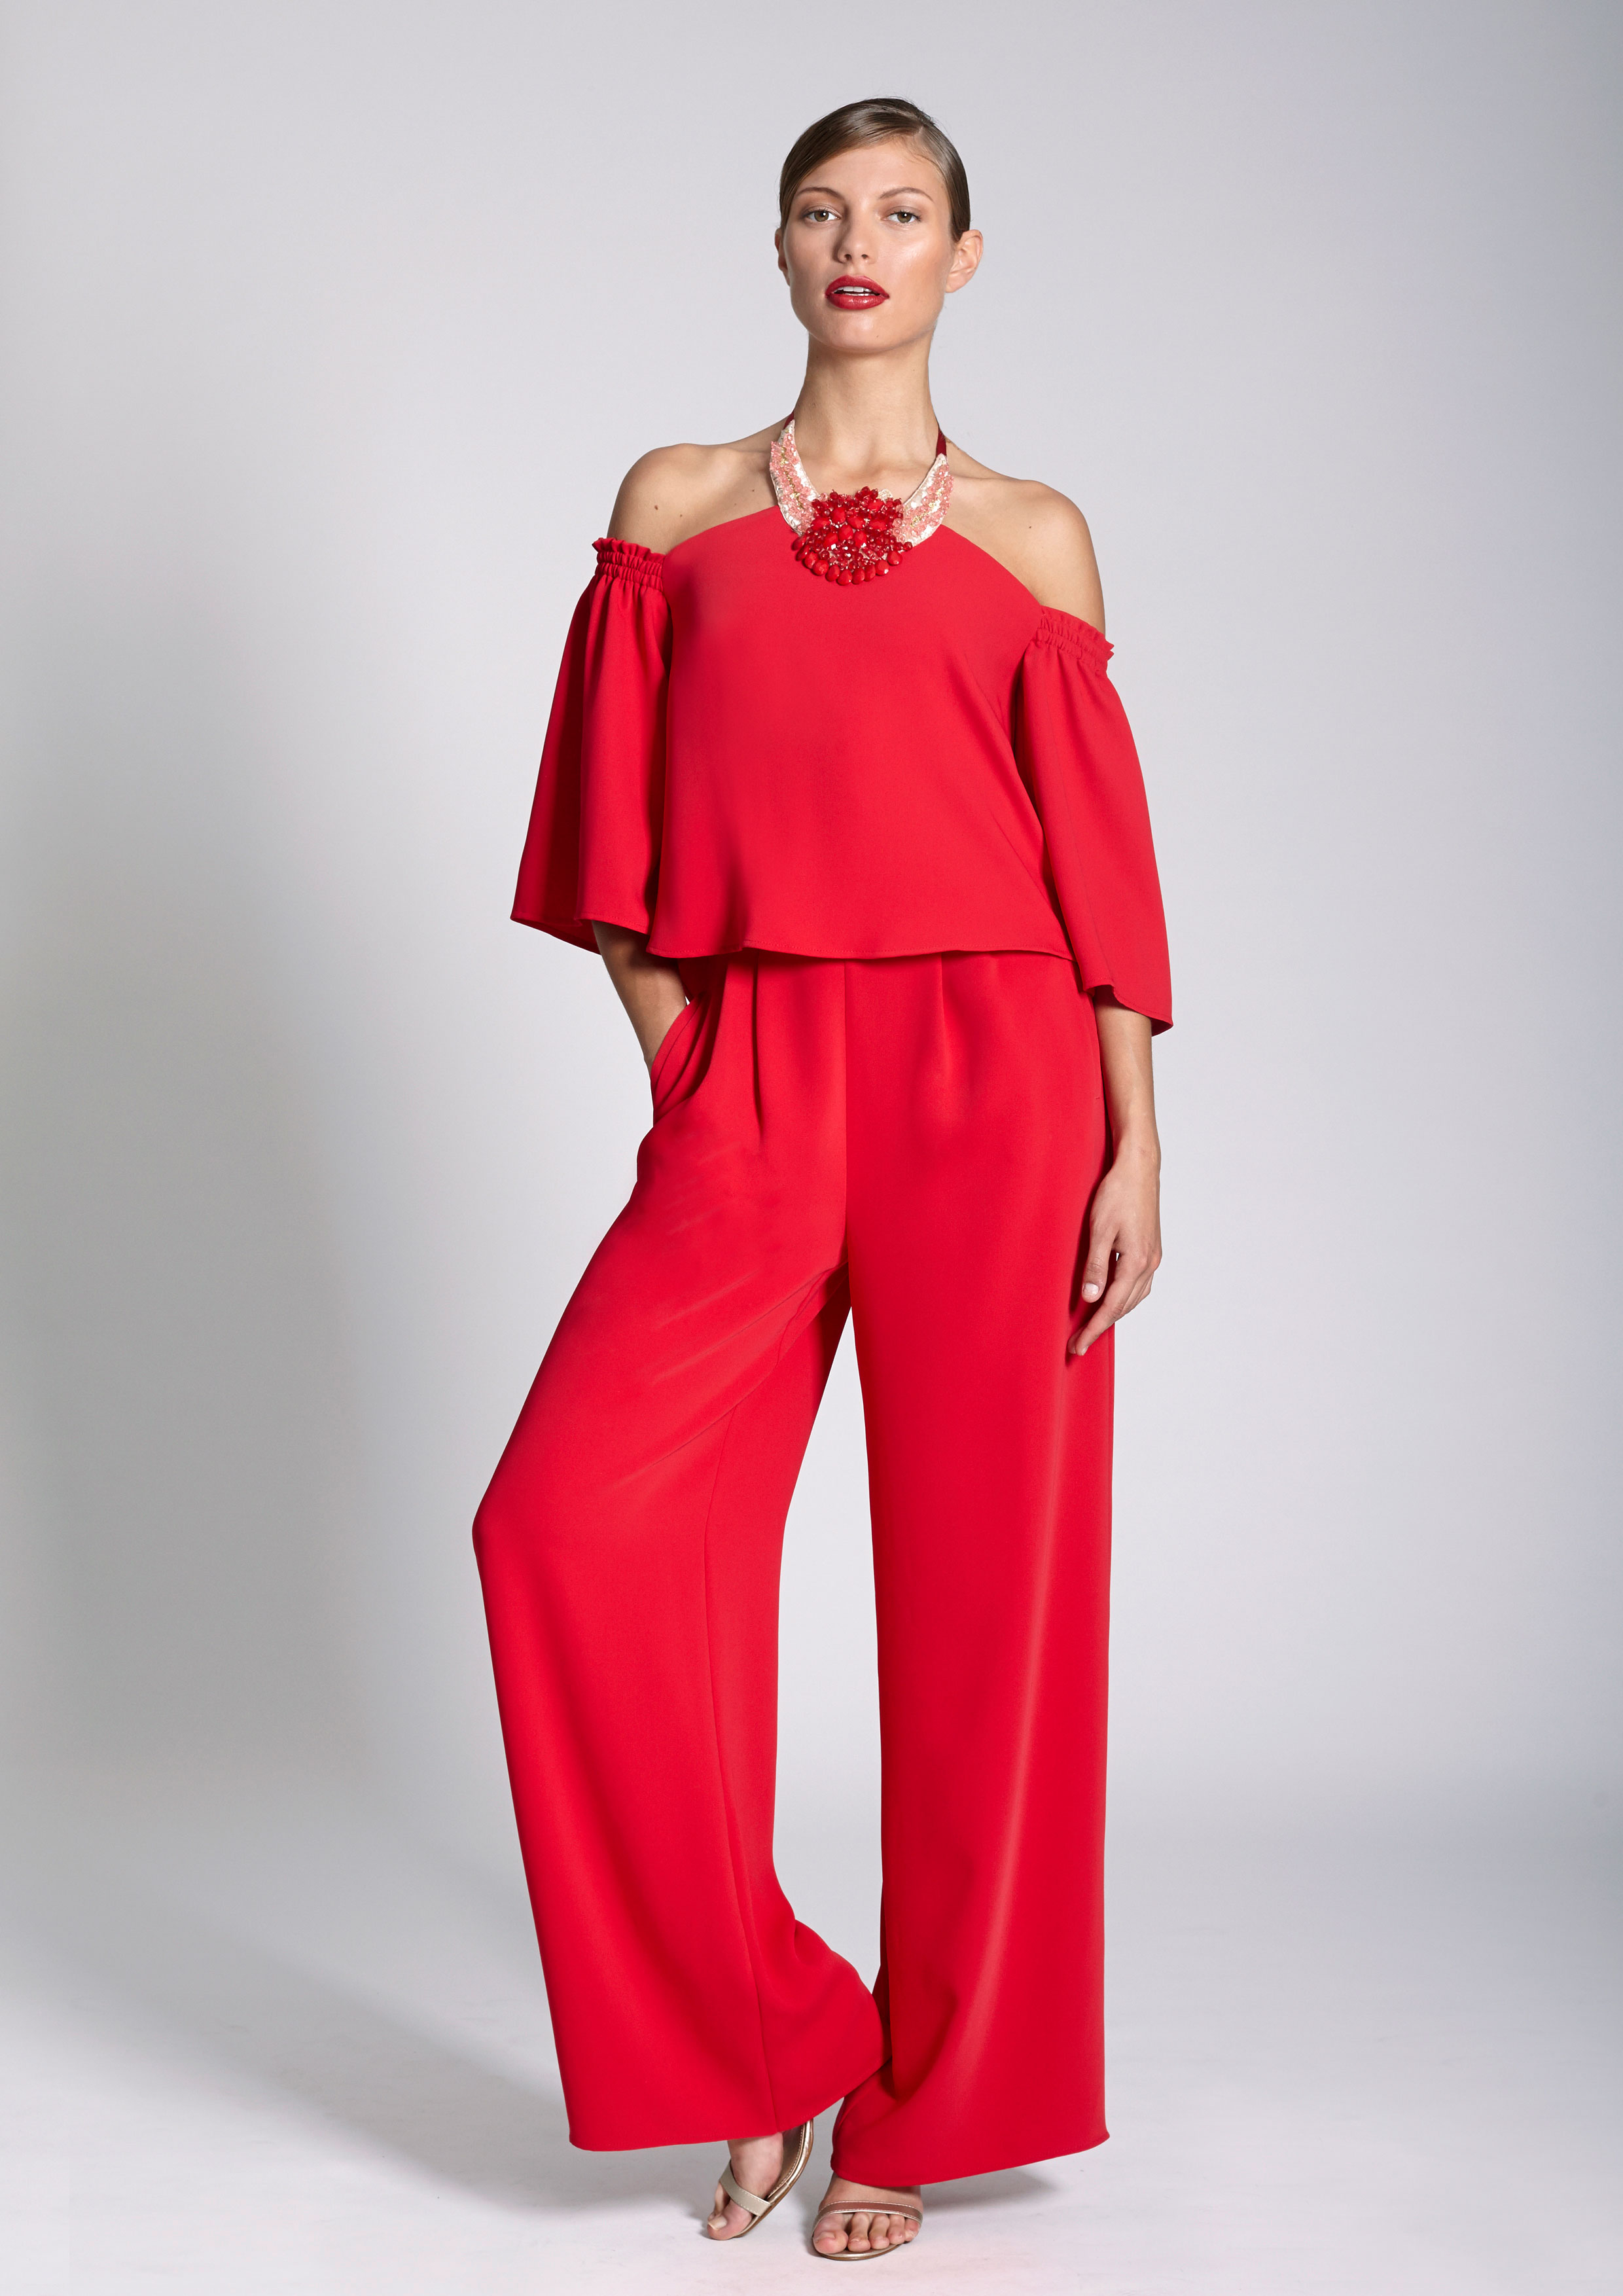 Red jumpsuit with embellished collar